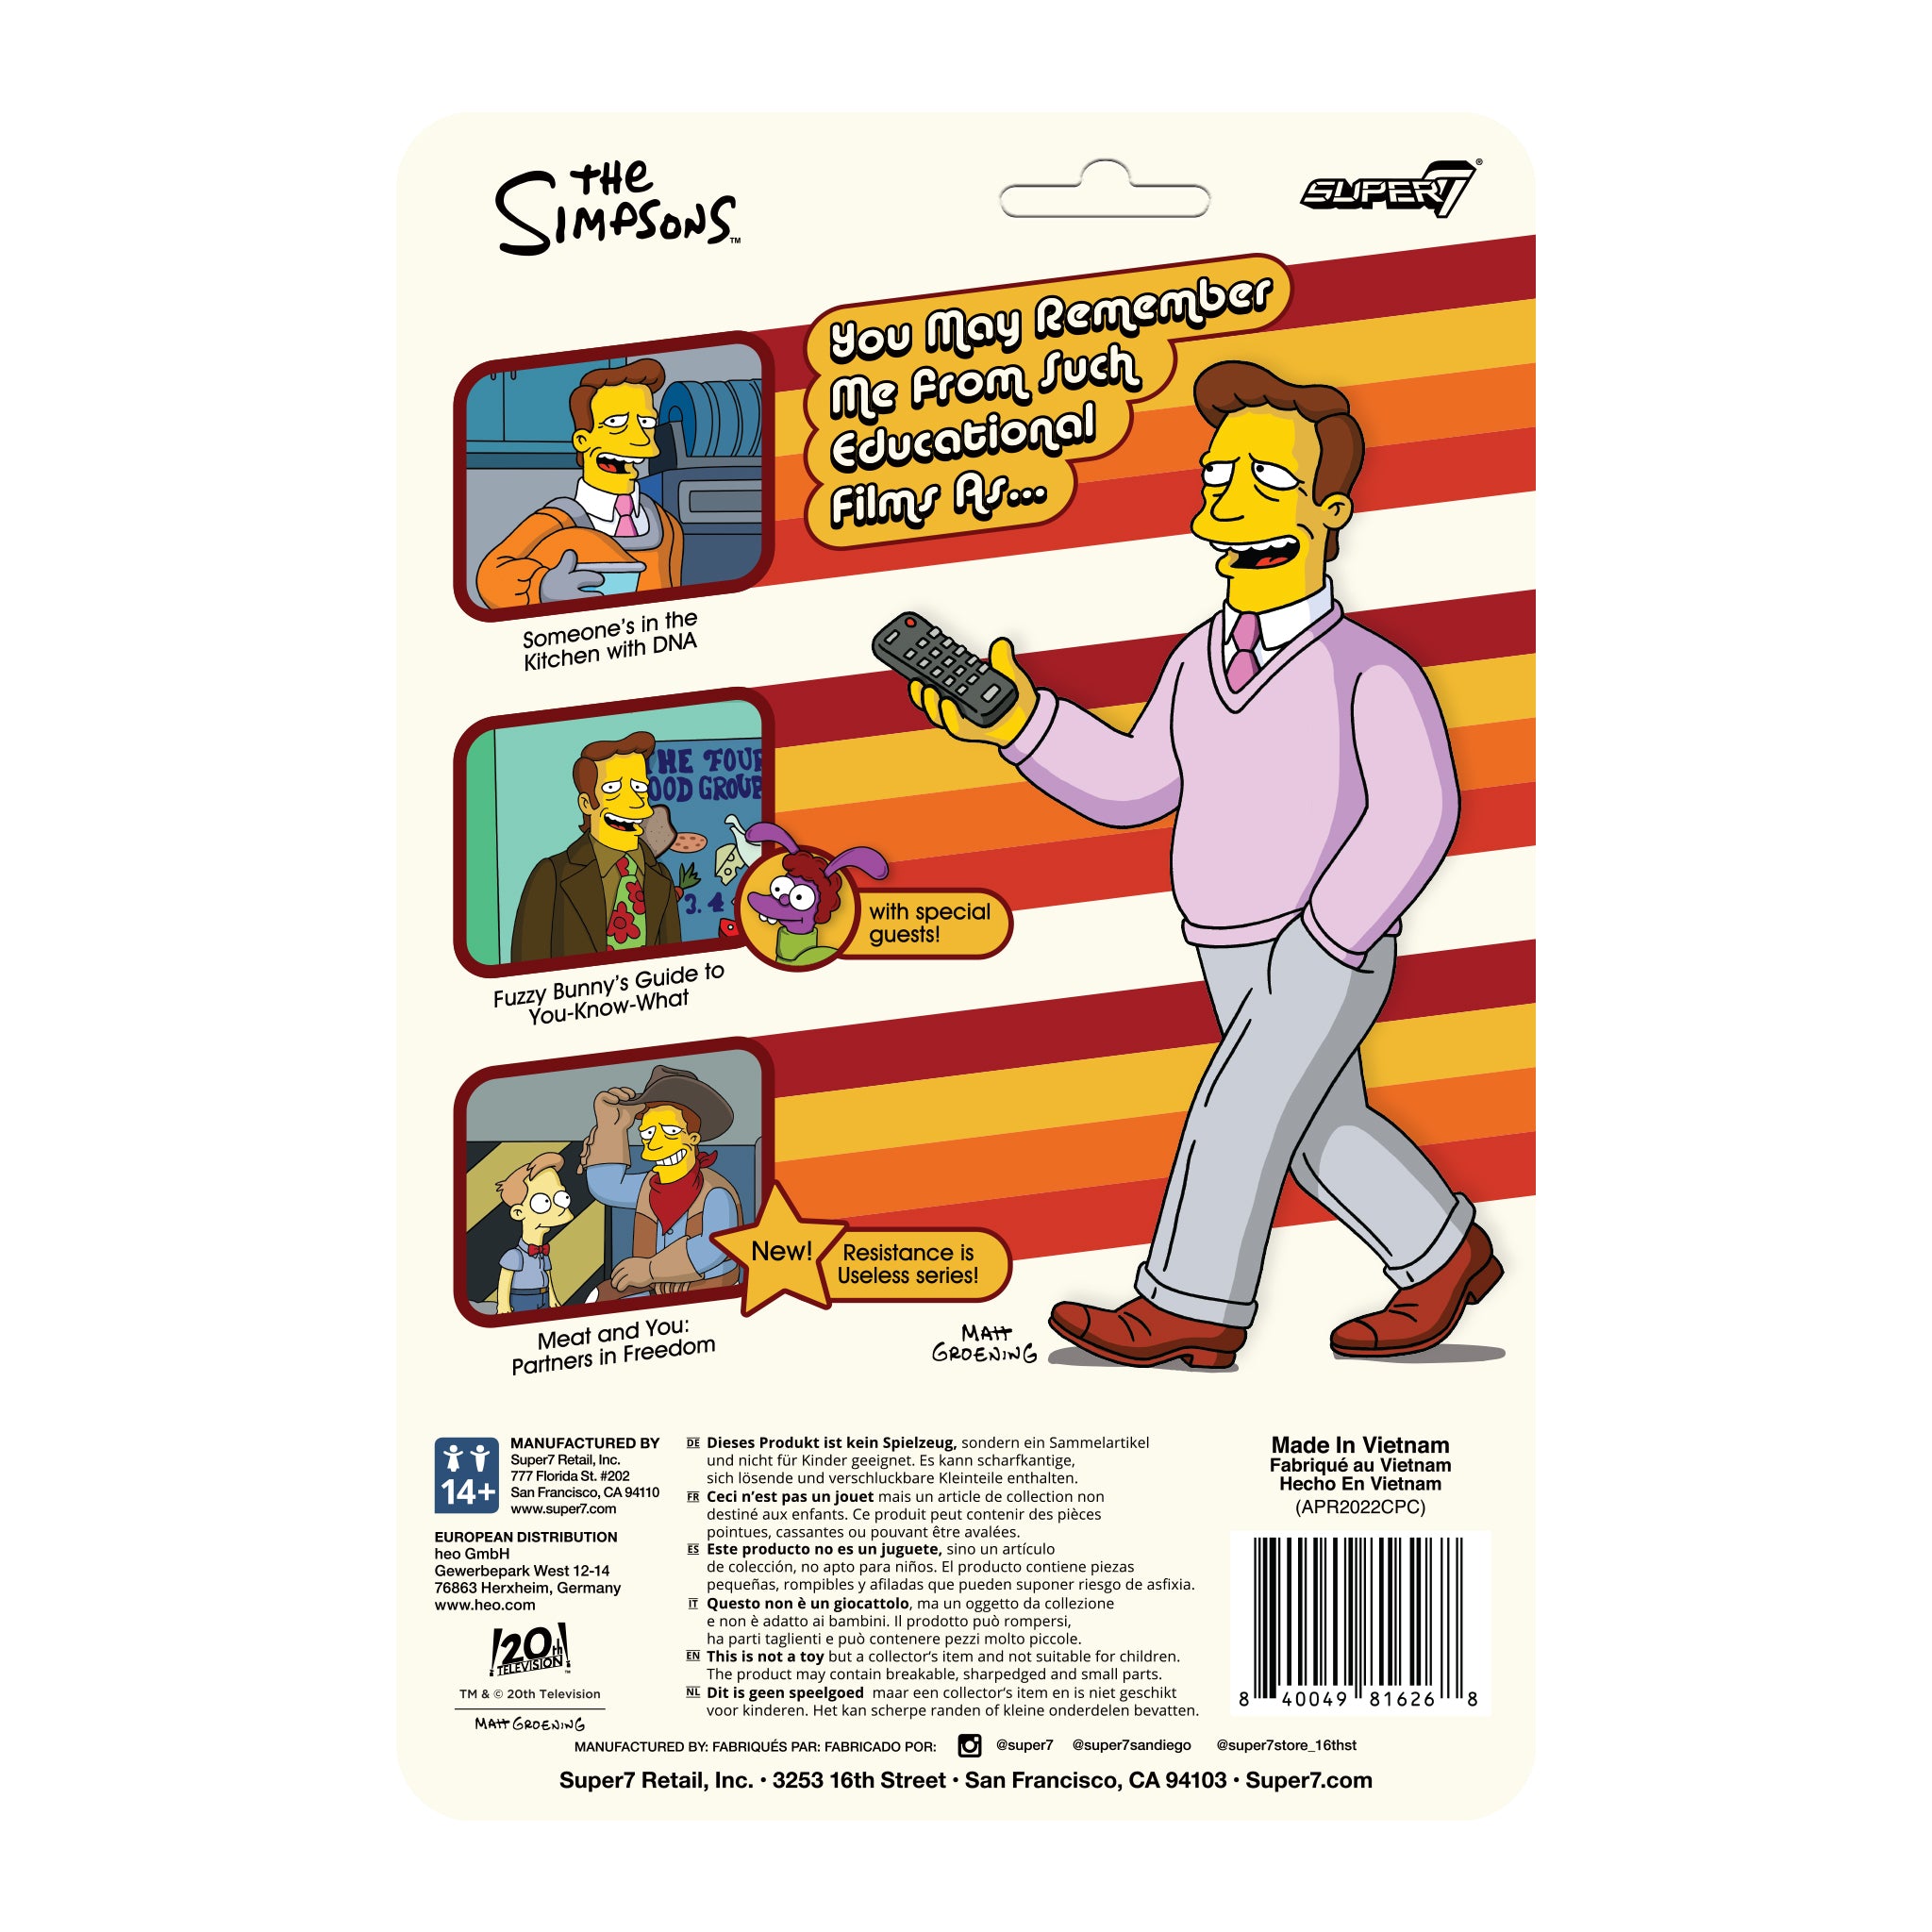 The Simpsons ReAction W2 - Troy McClure (Meat and You: Partners in Freedom)